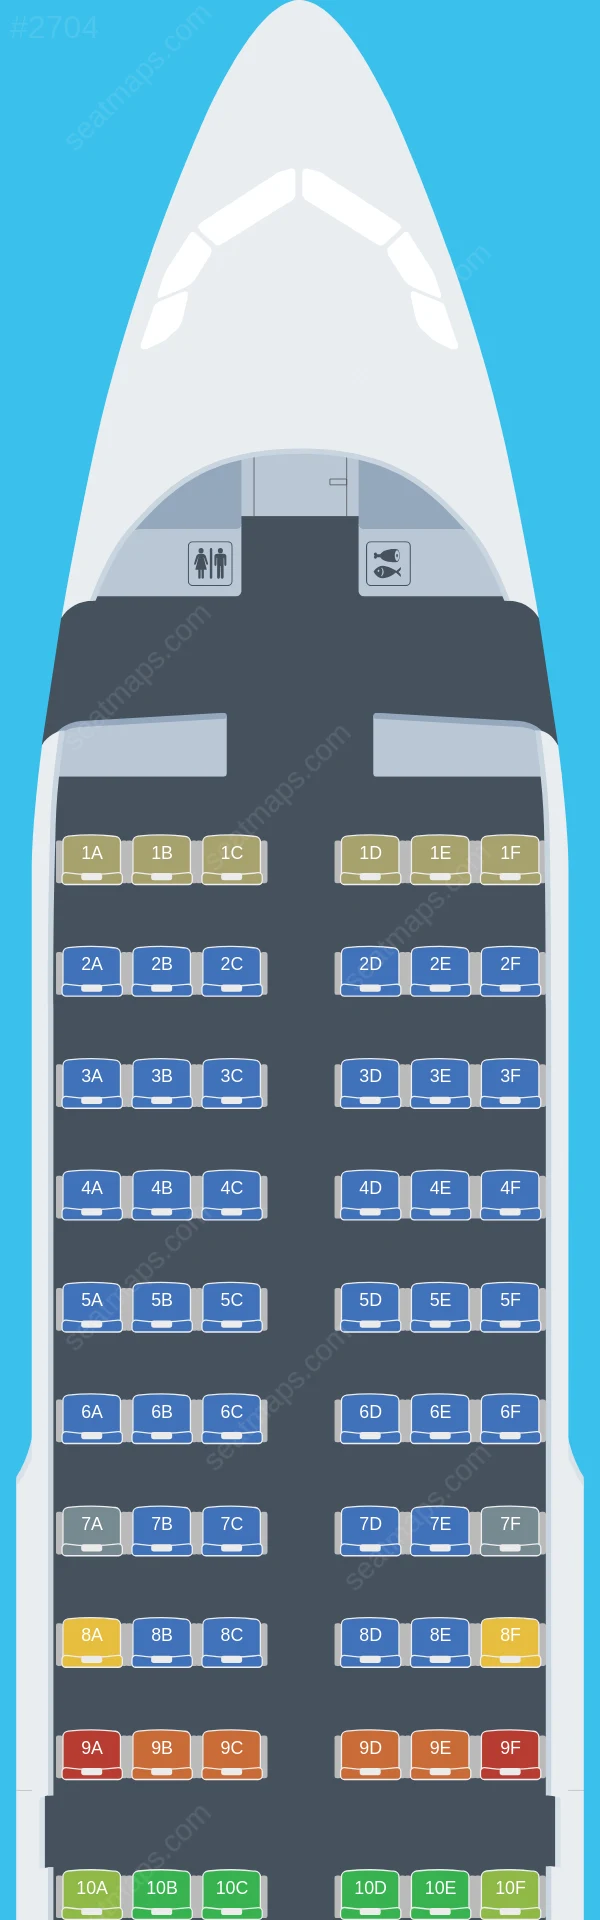 LATAM Airlines Airbus A319-100 seatmap preview